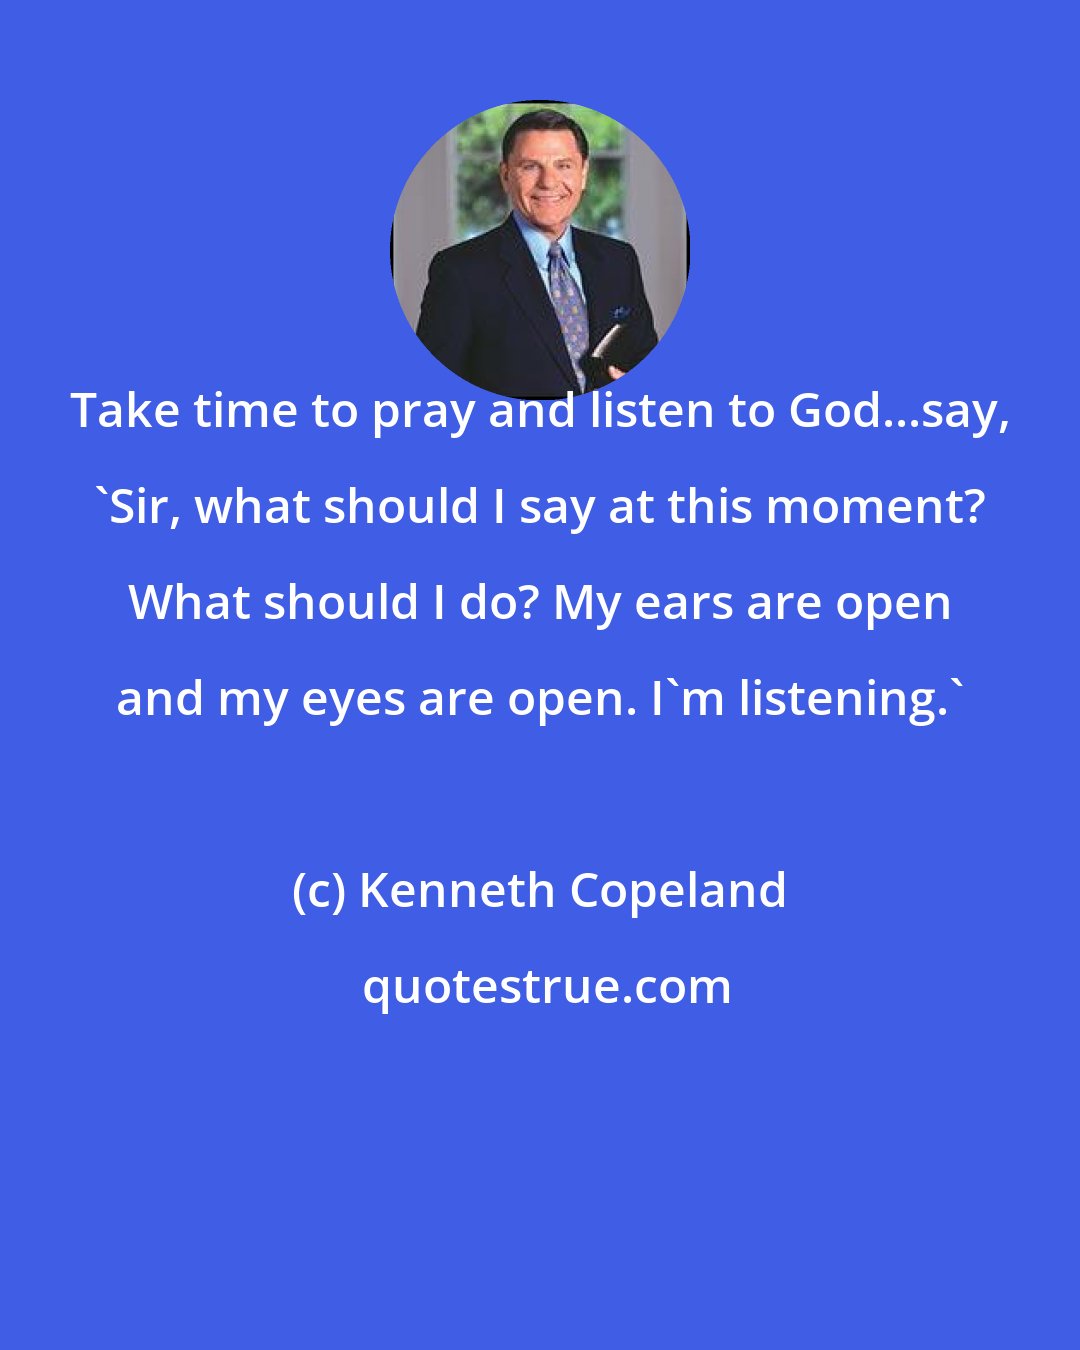 Kenneth Copeland: Take time to pray and listen to God...say, 'Sir, what should I say at this moment? What should I do? My ears are open and my eyes are open. I'm listening.'